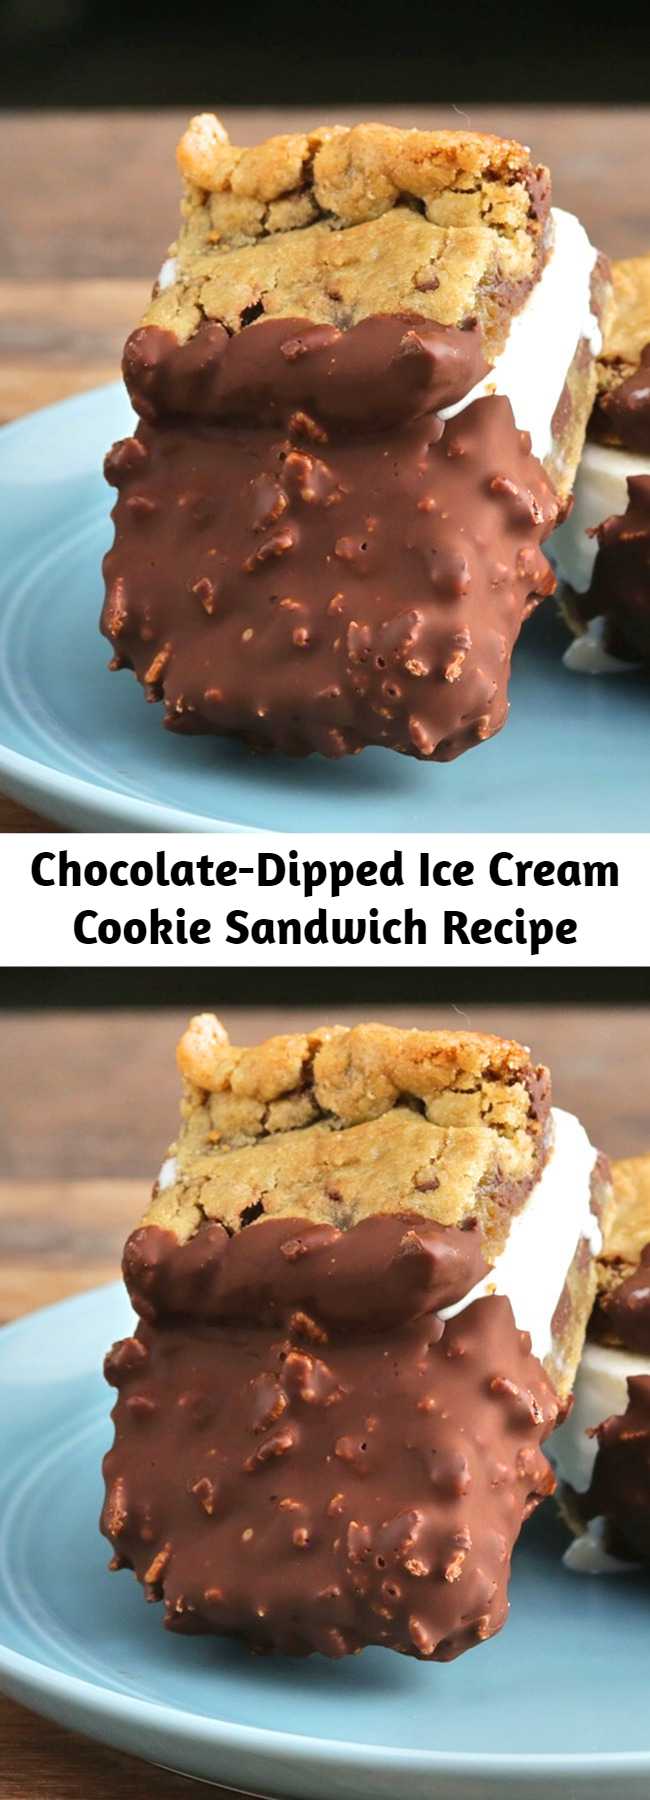 How do you make an ice cream sandwich with chocolate chip cookies even better? Dip it in chocolate. Boom!